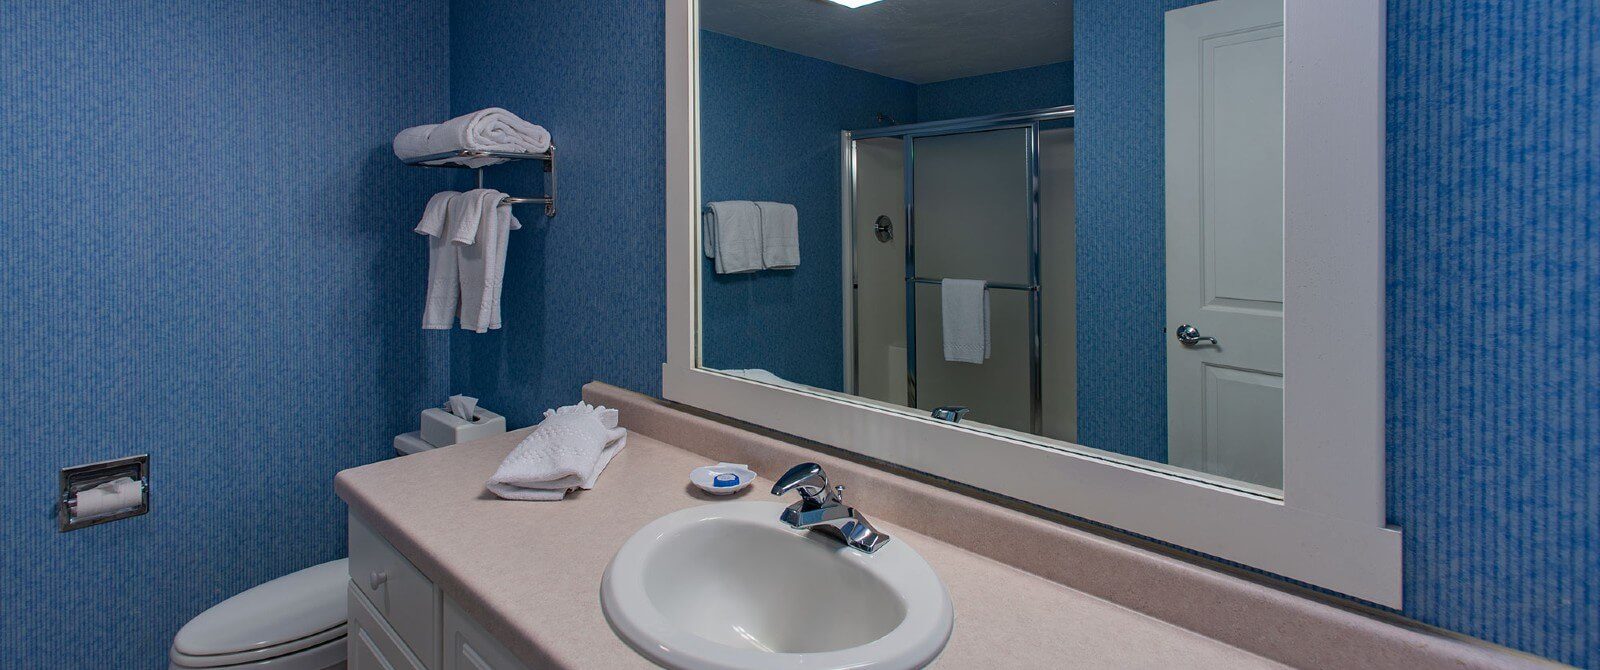 Bathroom with blue wallpaper, single sink vanity, toilet, white framed mirror and hanging towels